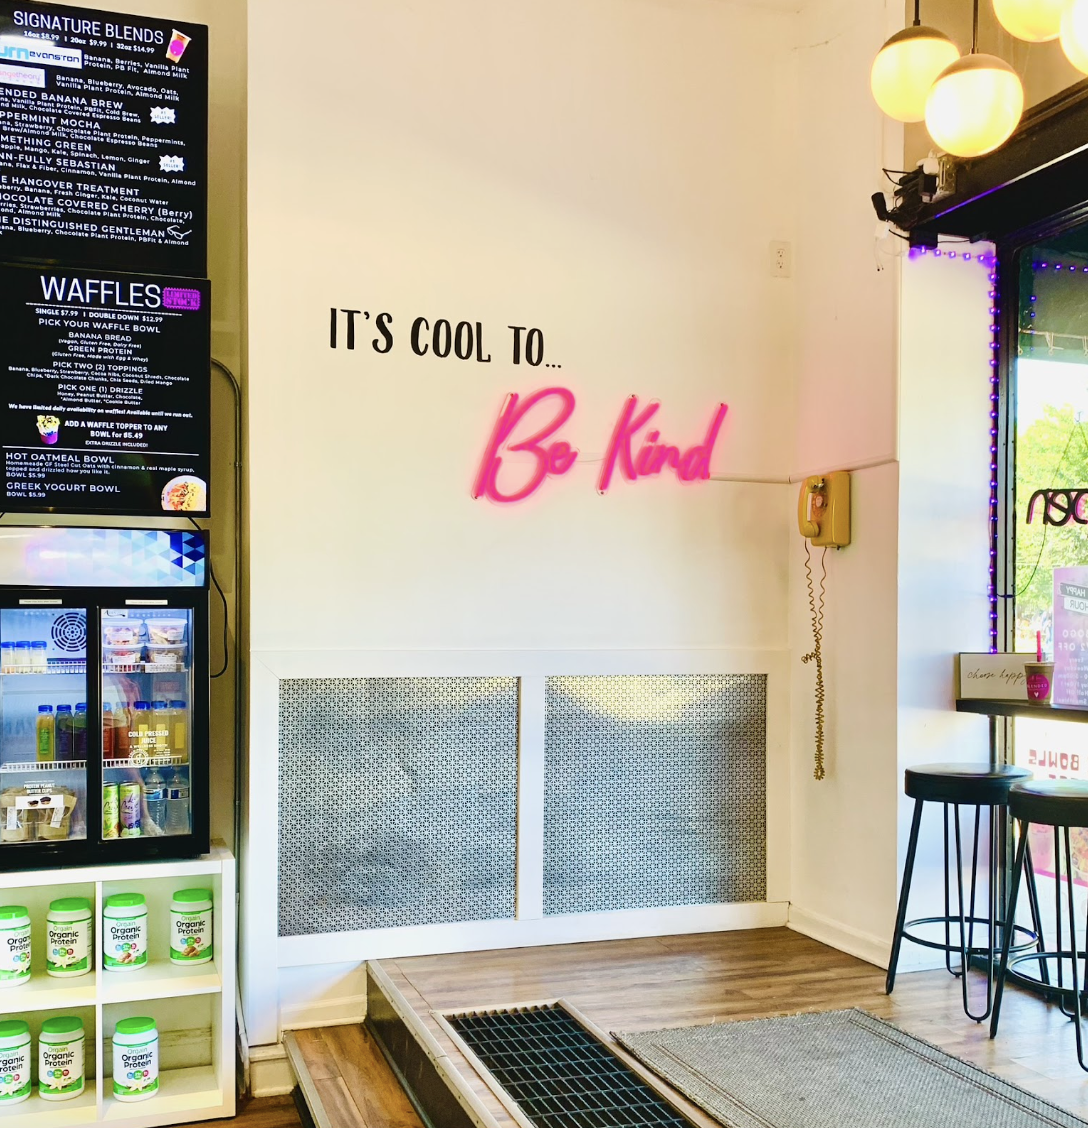 Blended Health & Smoothie Bar aims to provide customers with healthy foods that complement their fitness goals.